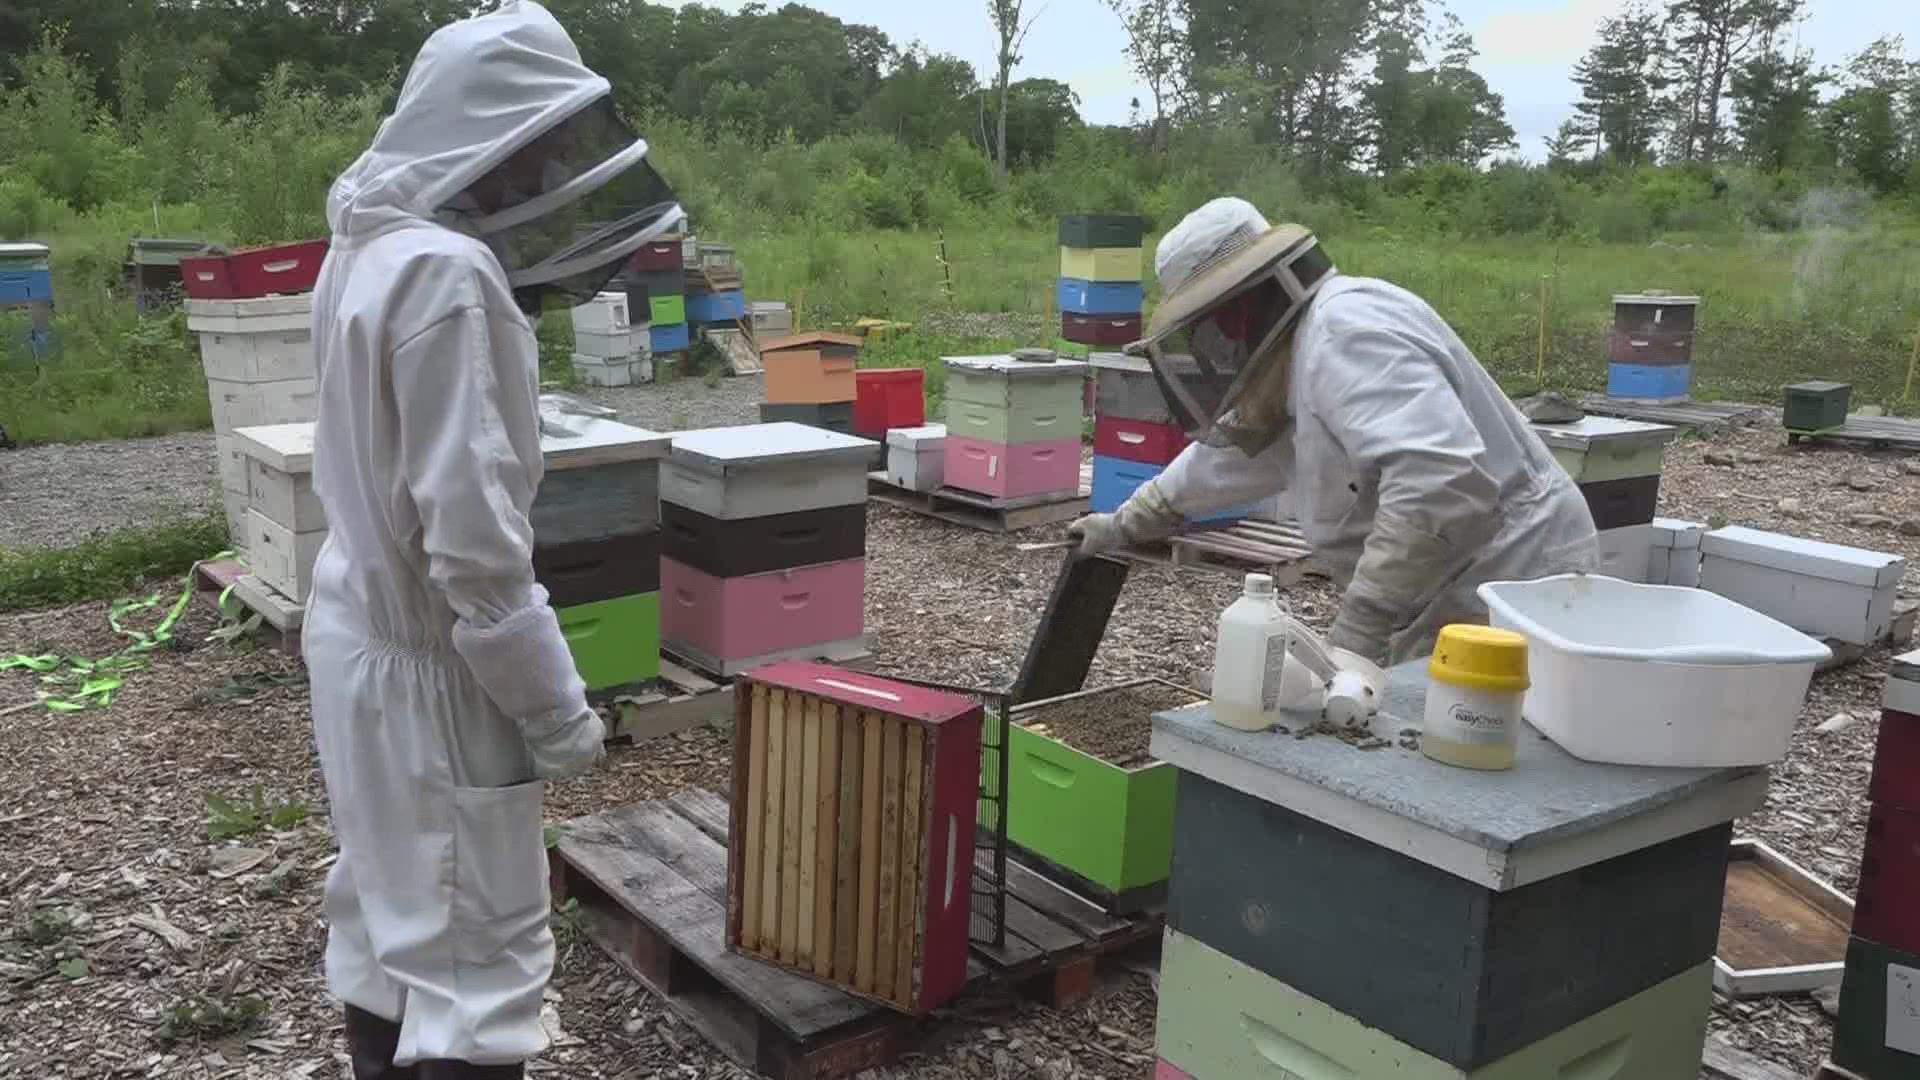 Mainers love their fresh, local honey. But bees face challenges and threats.